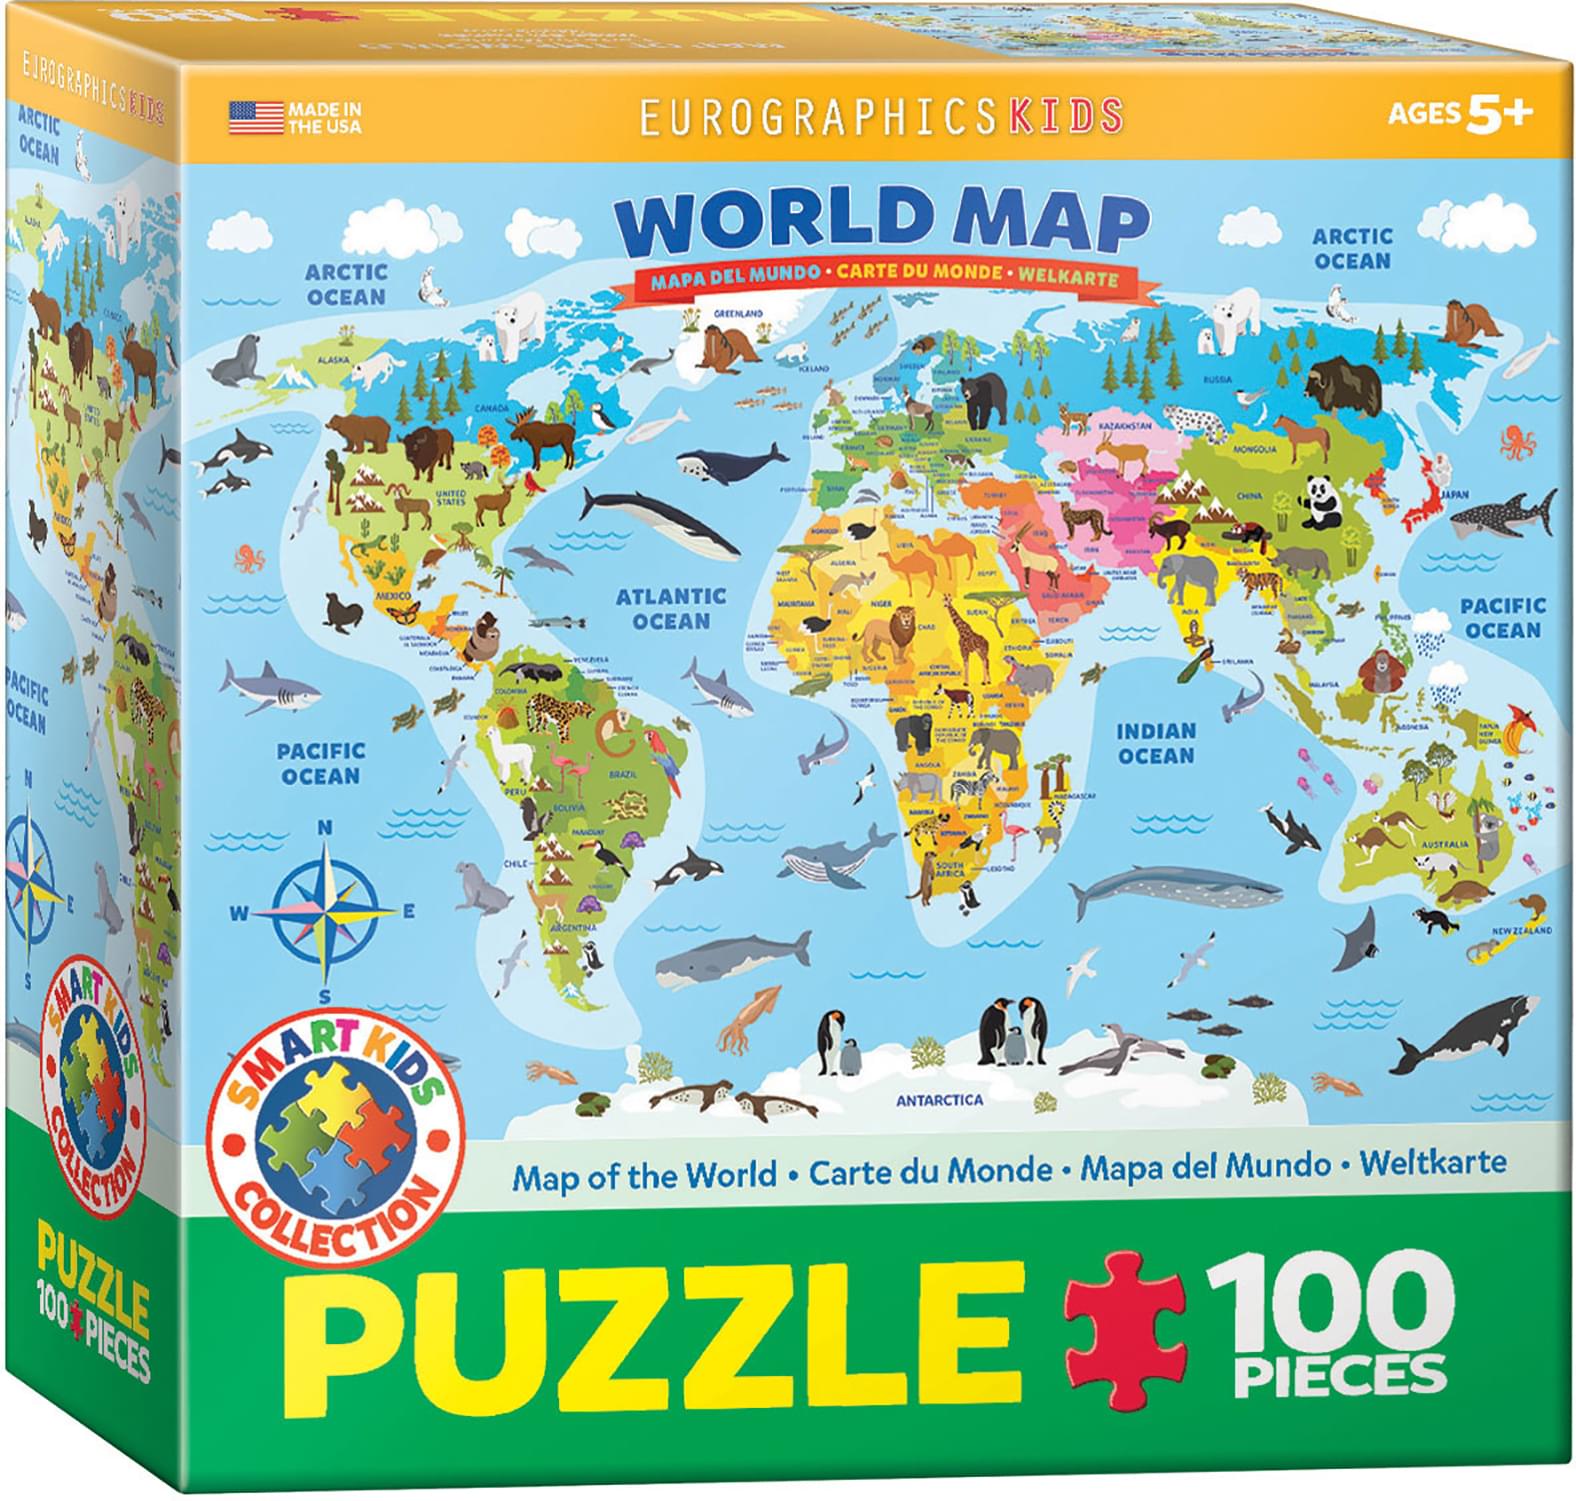 Illustrated Map of the World 100 Piece Jigsaw Puzzle